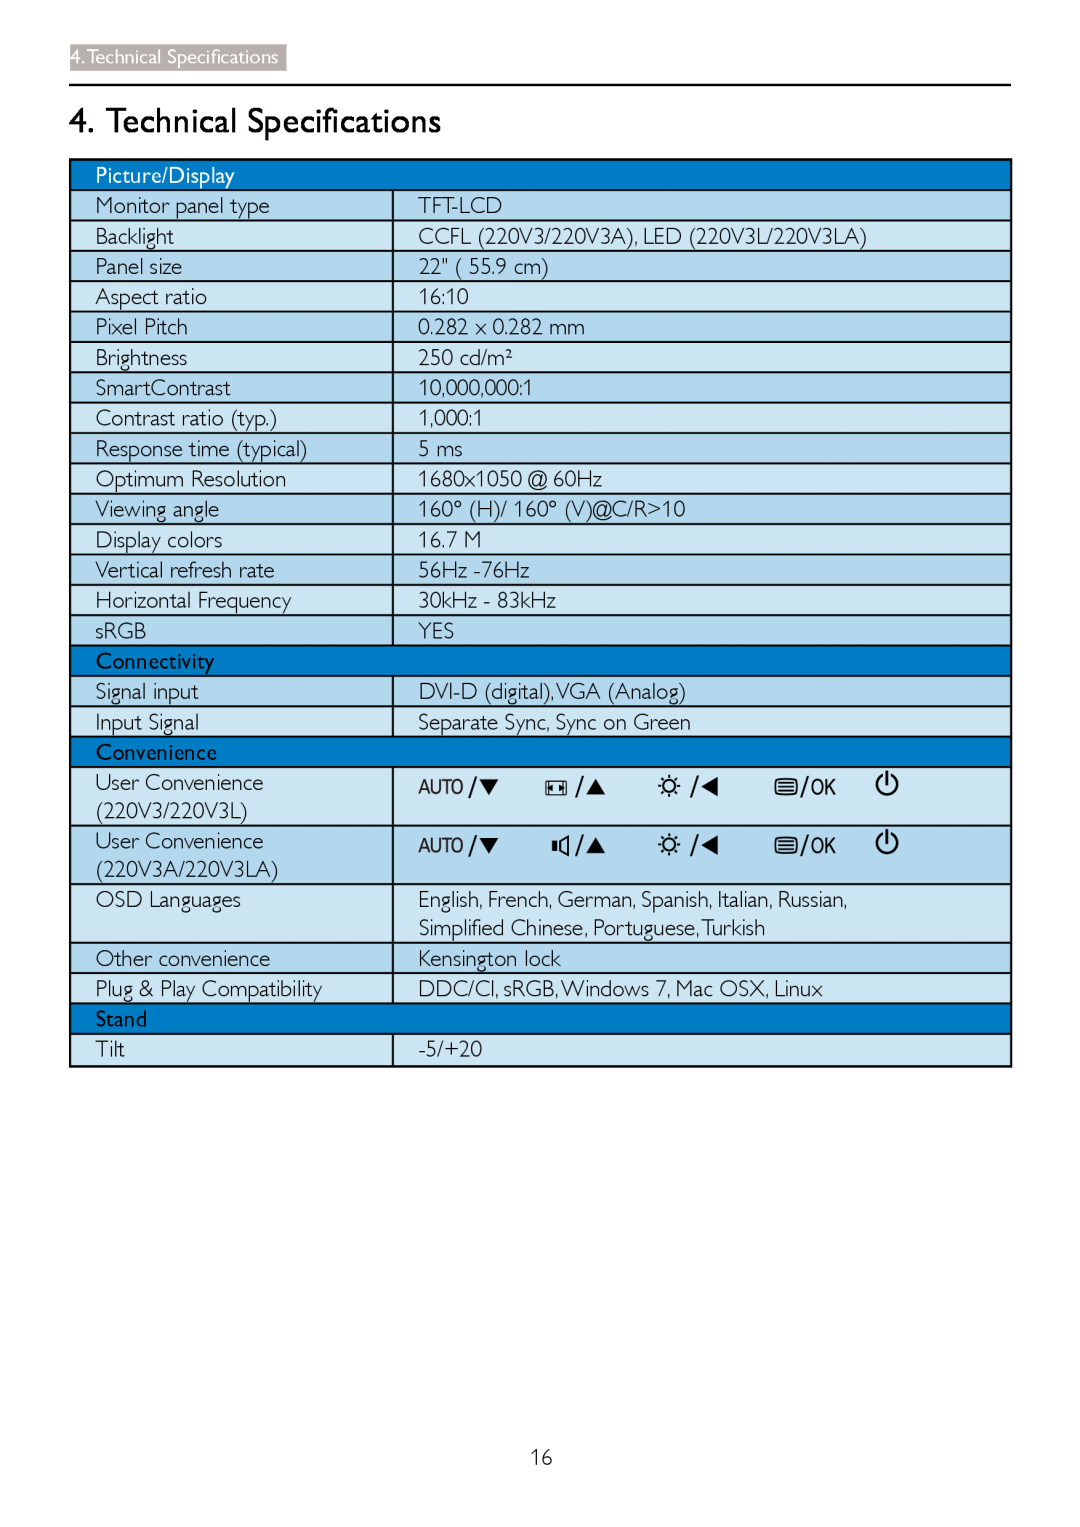 Philips 220V3 user manual Technical Specifications, Picture/Display 